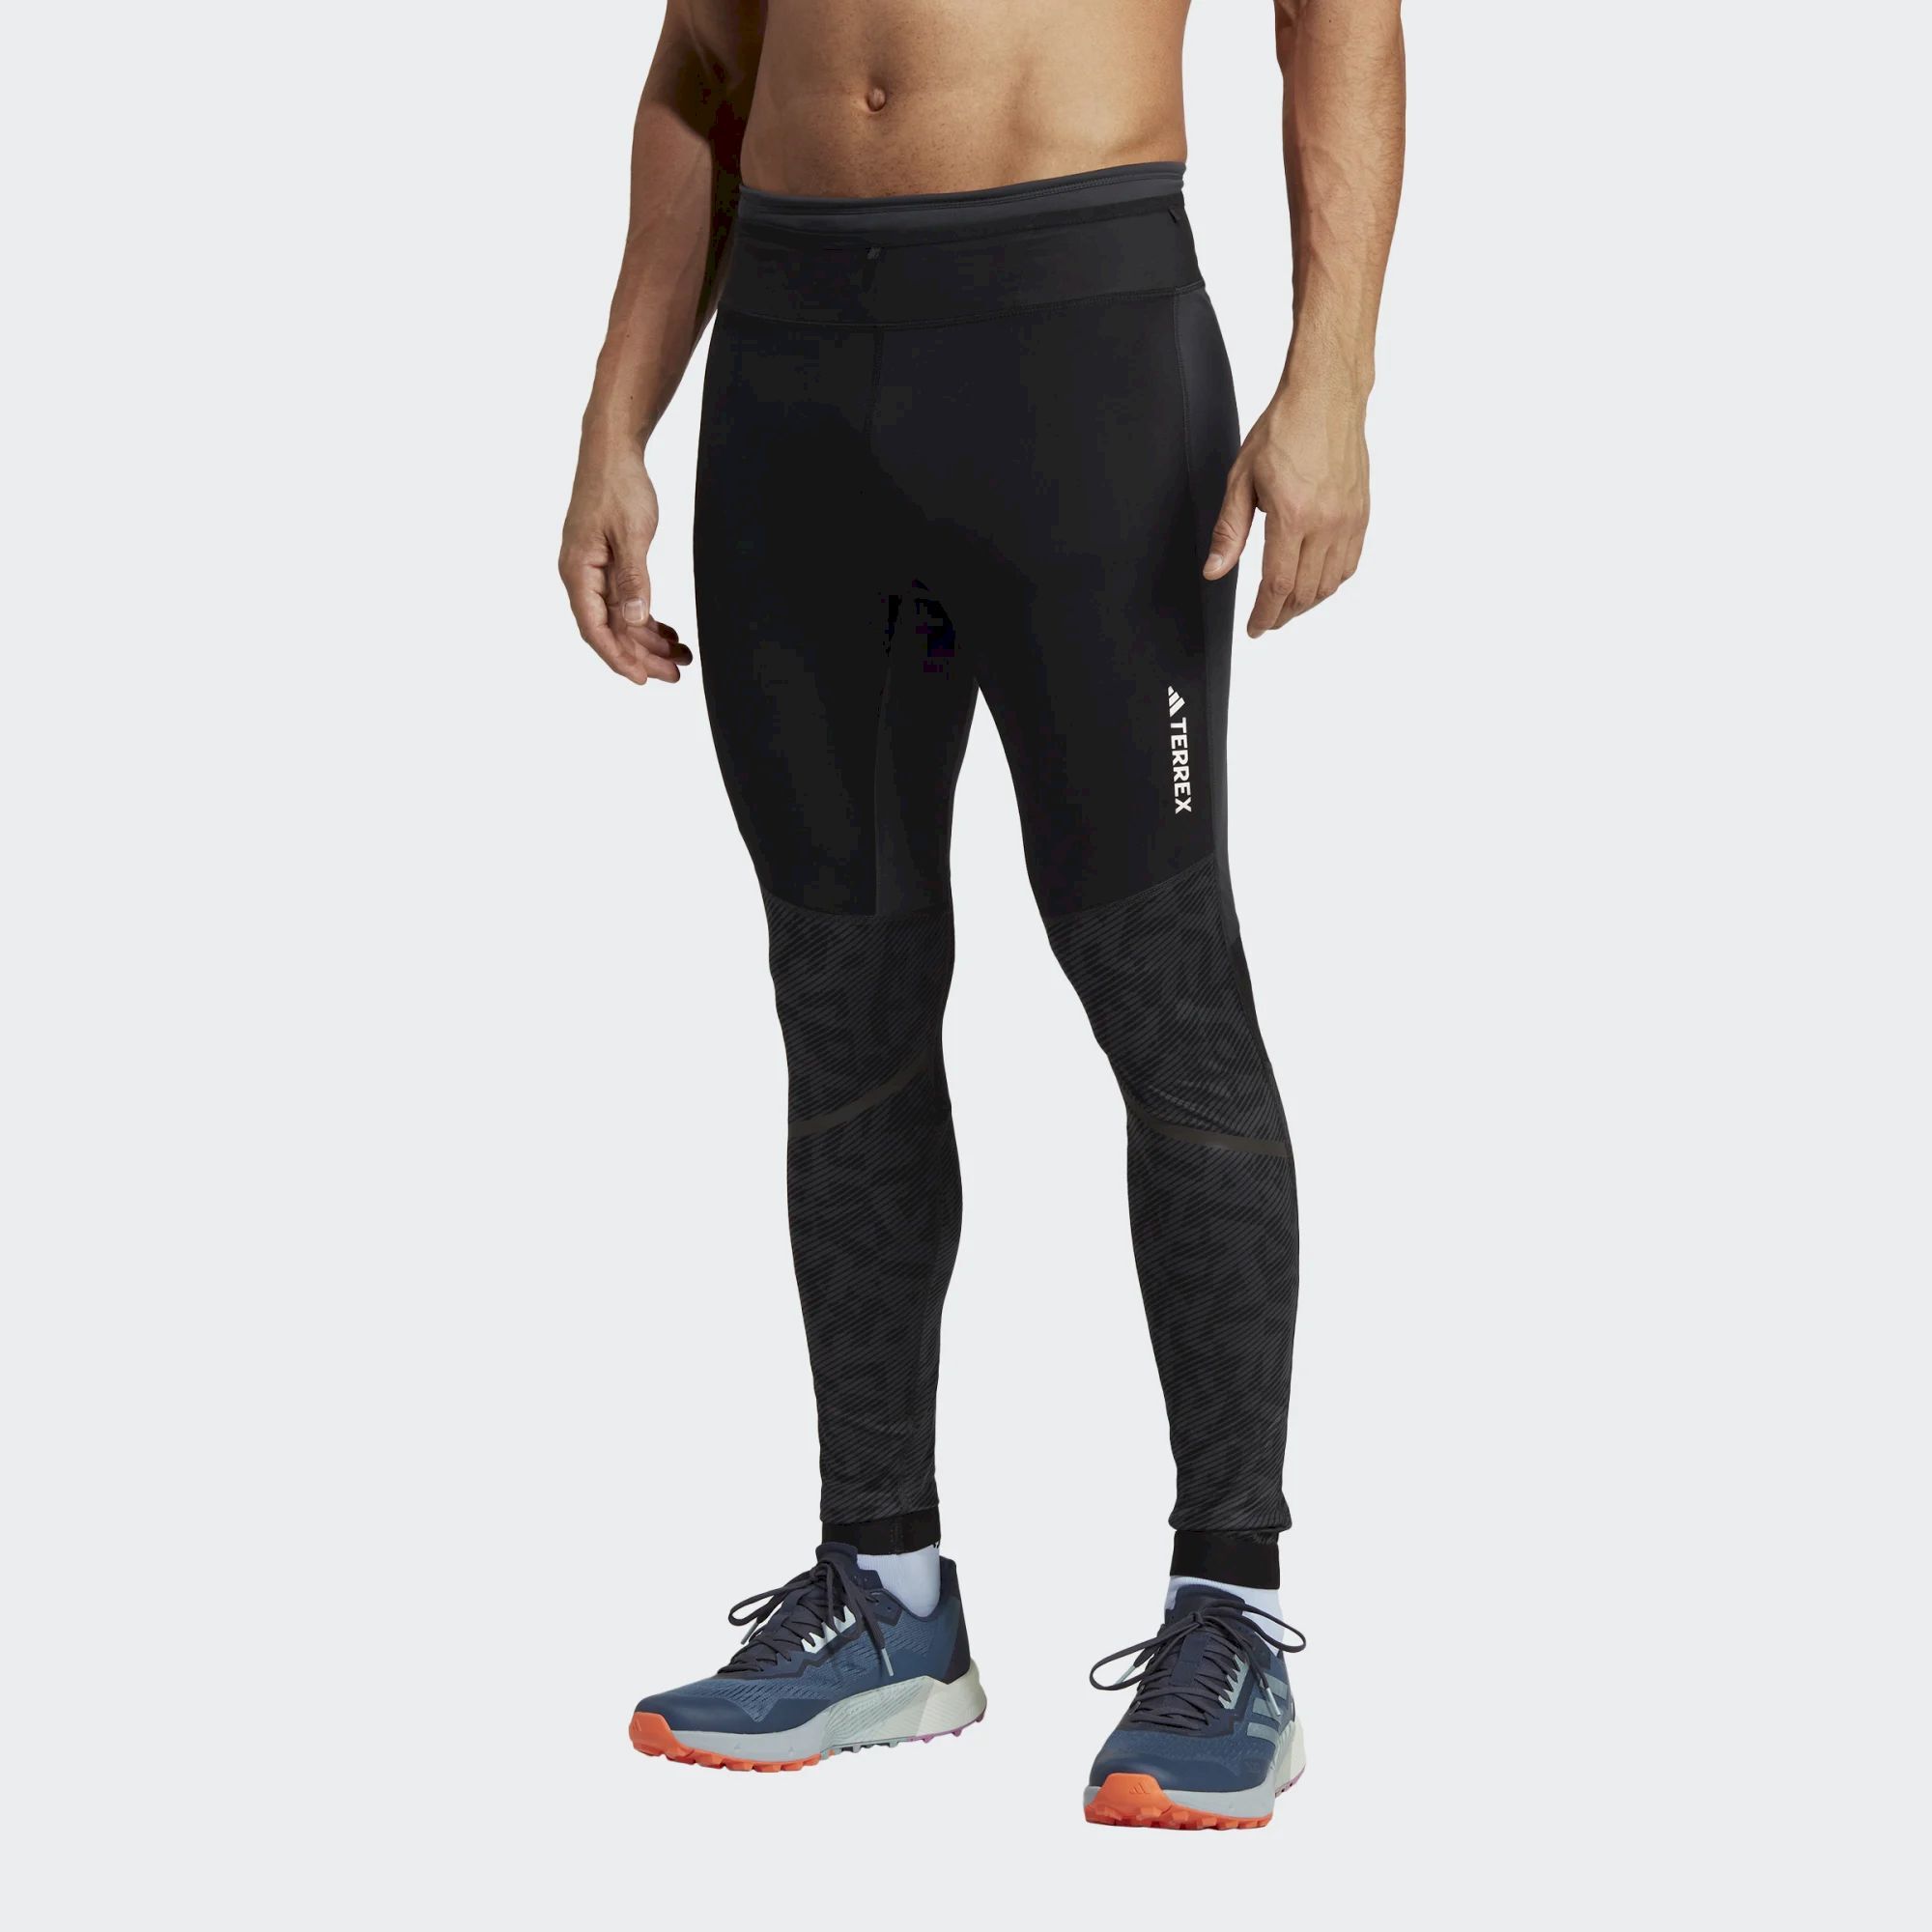 Adidas Agravic tight - Collant running homme | Hardloop